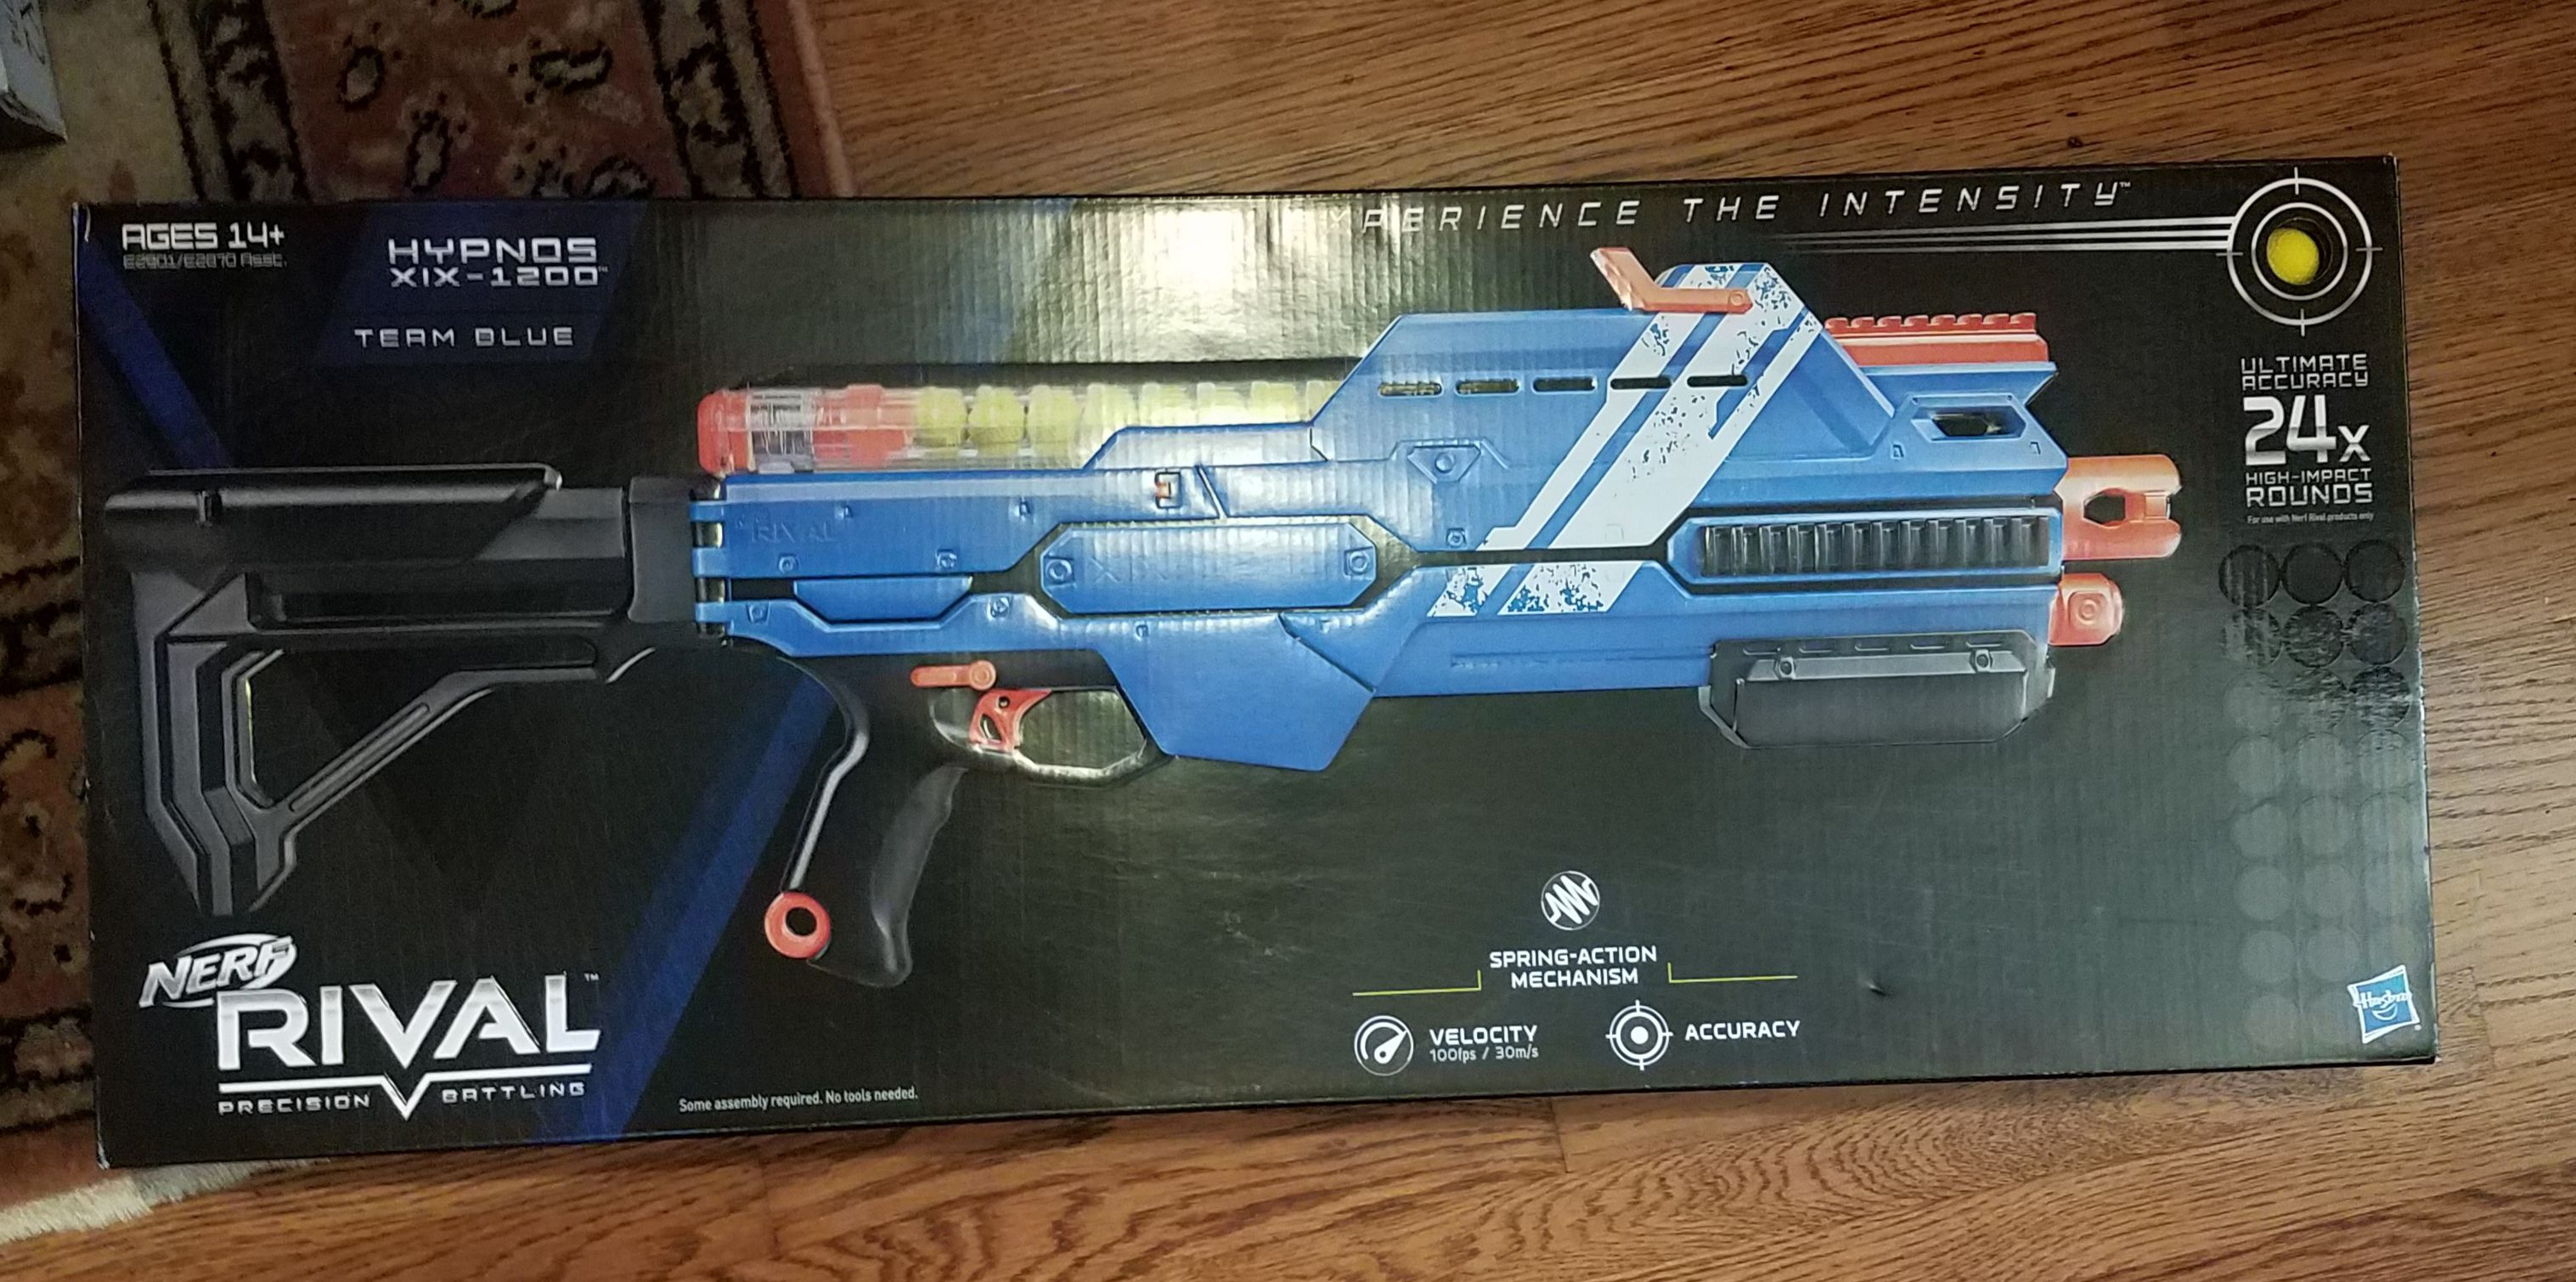 New Nerf Rival Hypnos XIX-1200 Team Blue Nerf Toy Gun - I have 3 available, price is for ONE